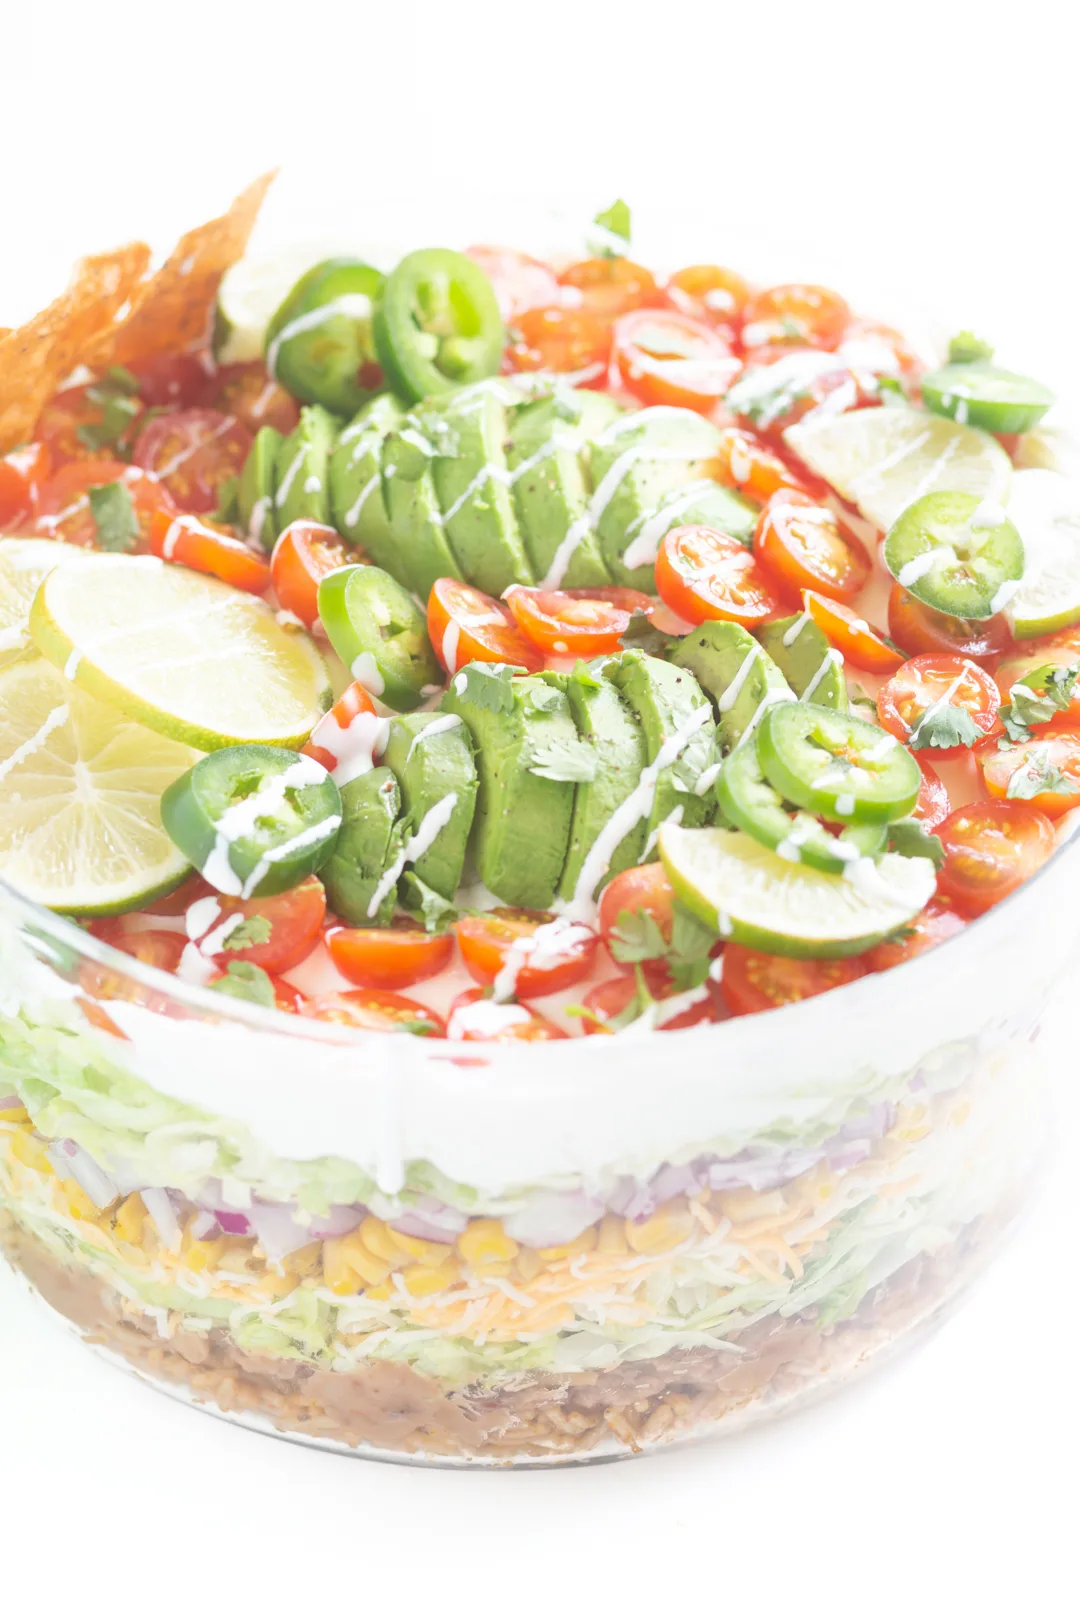 view of top of layered salad with sliced avocados, sliced cherry tomatoes and lime slices.